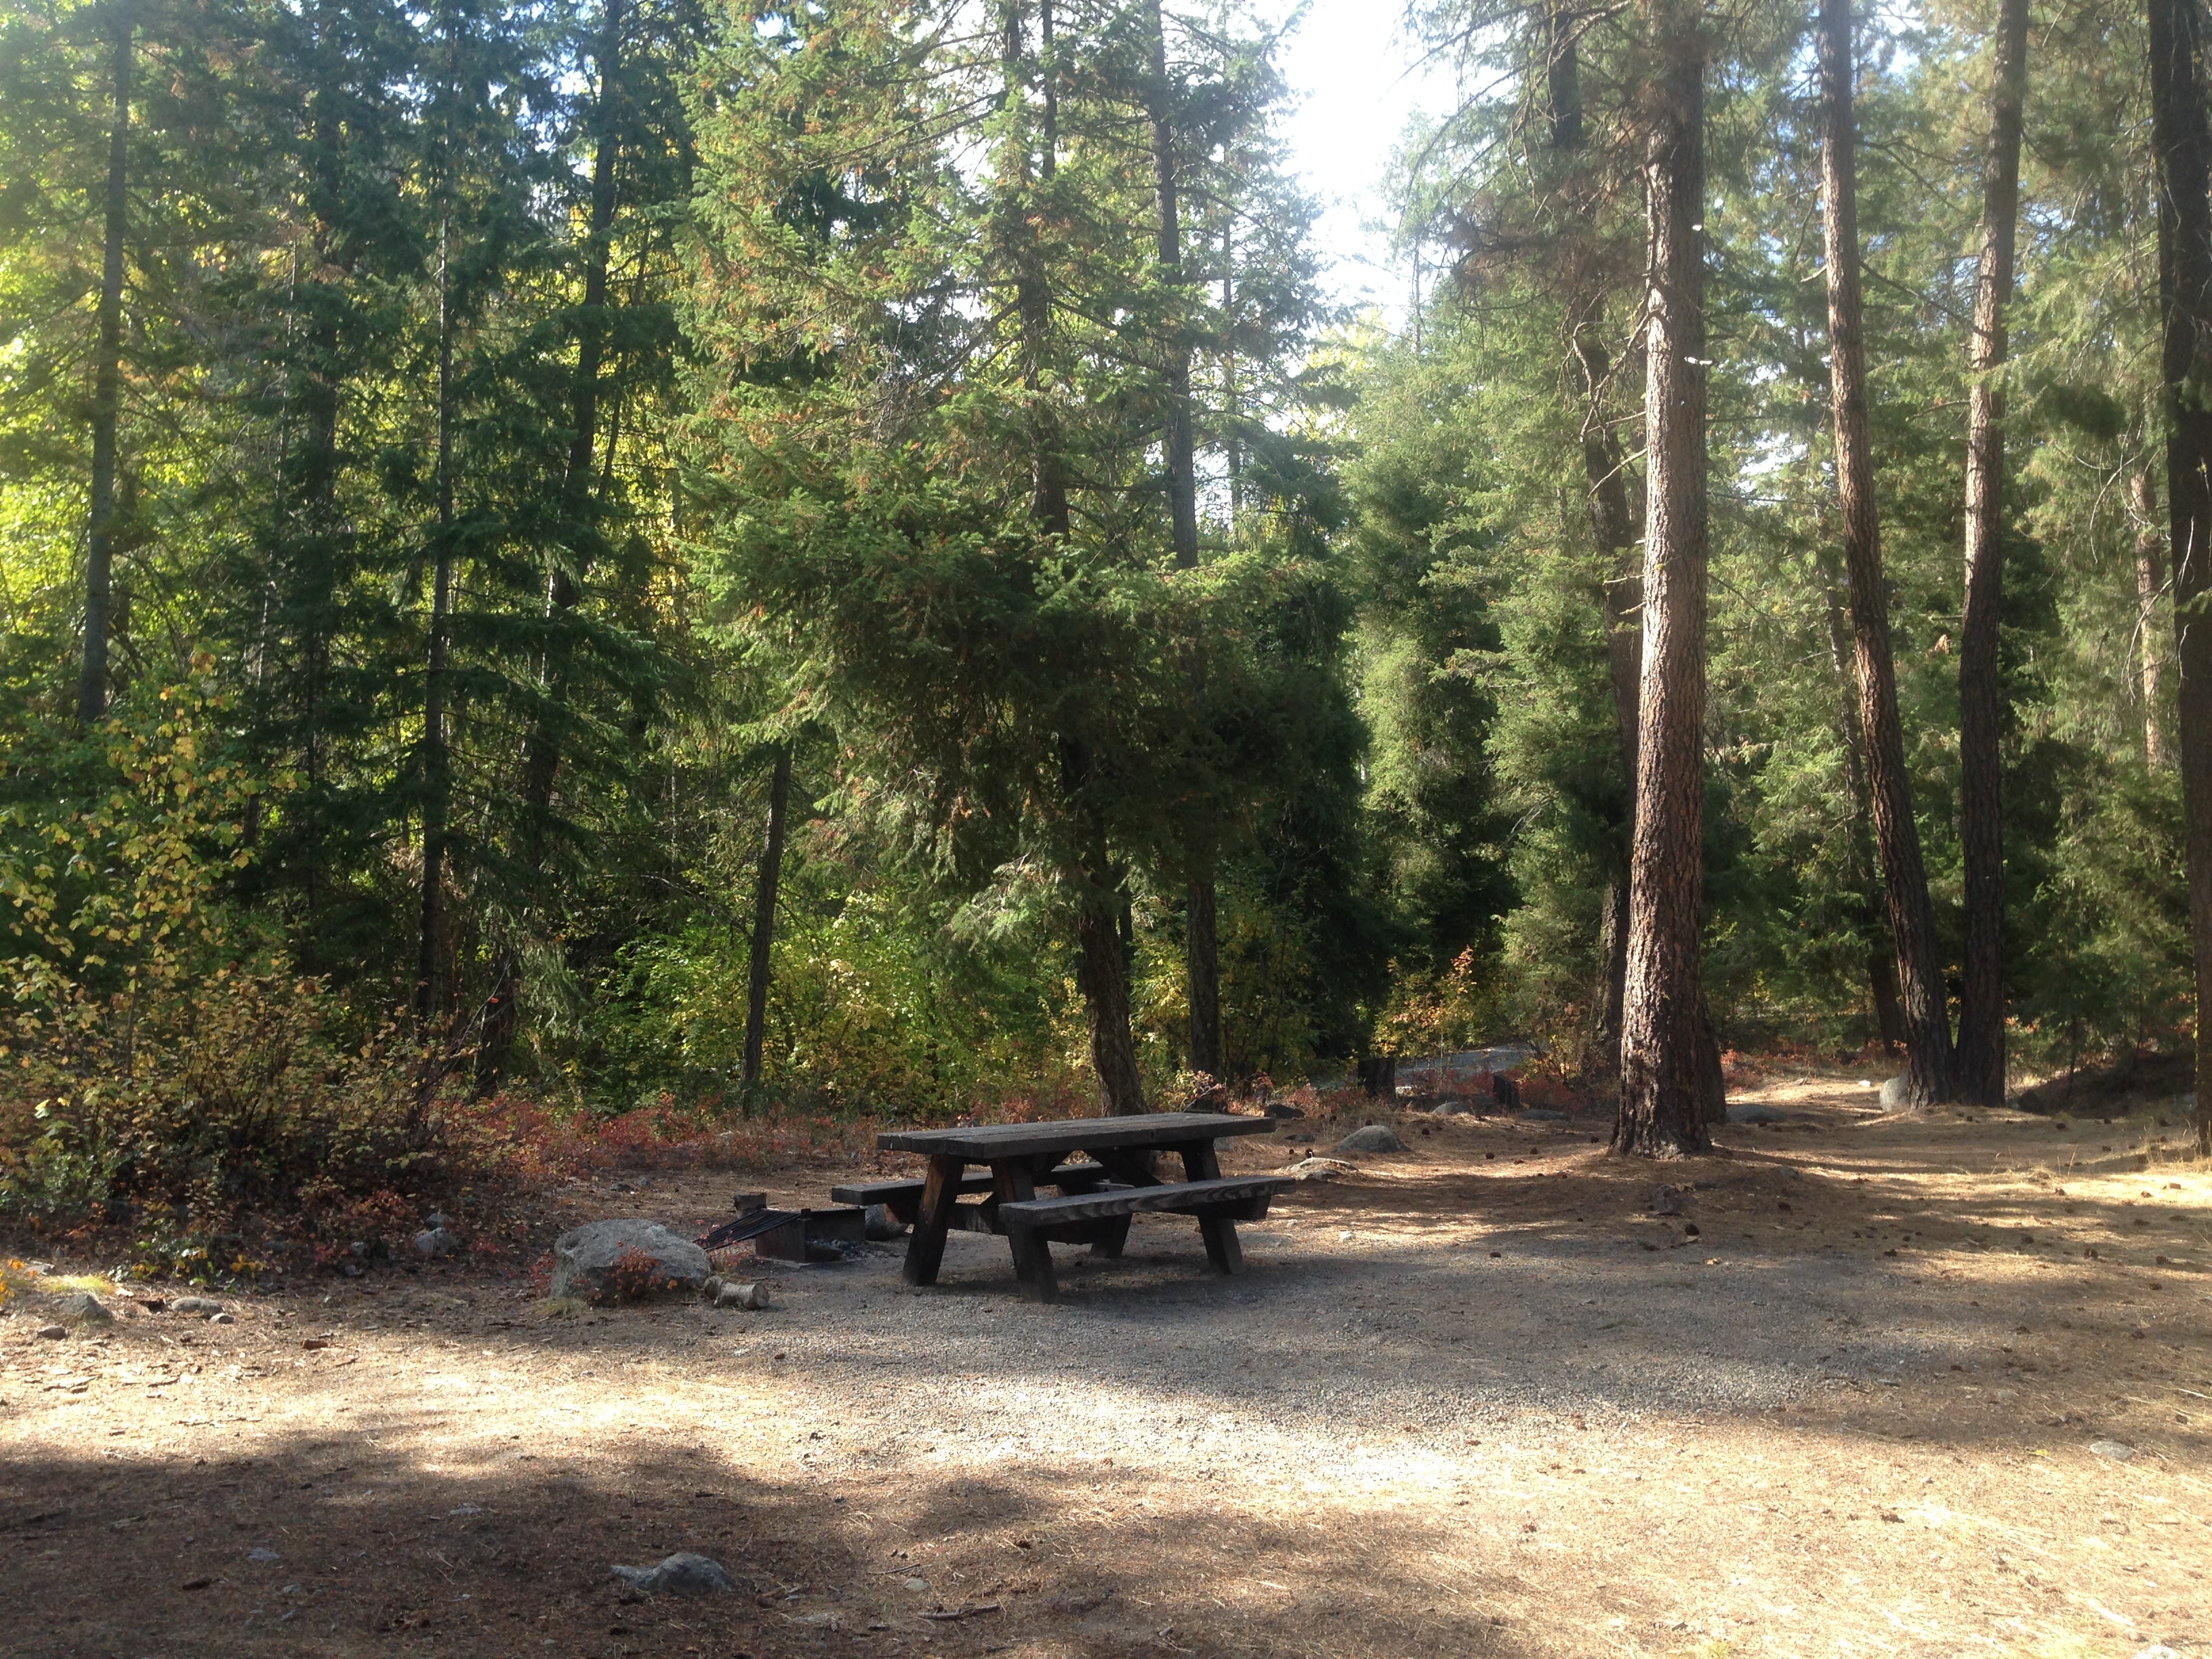 Camper submitted image from Foggy Dew Campground - 1